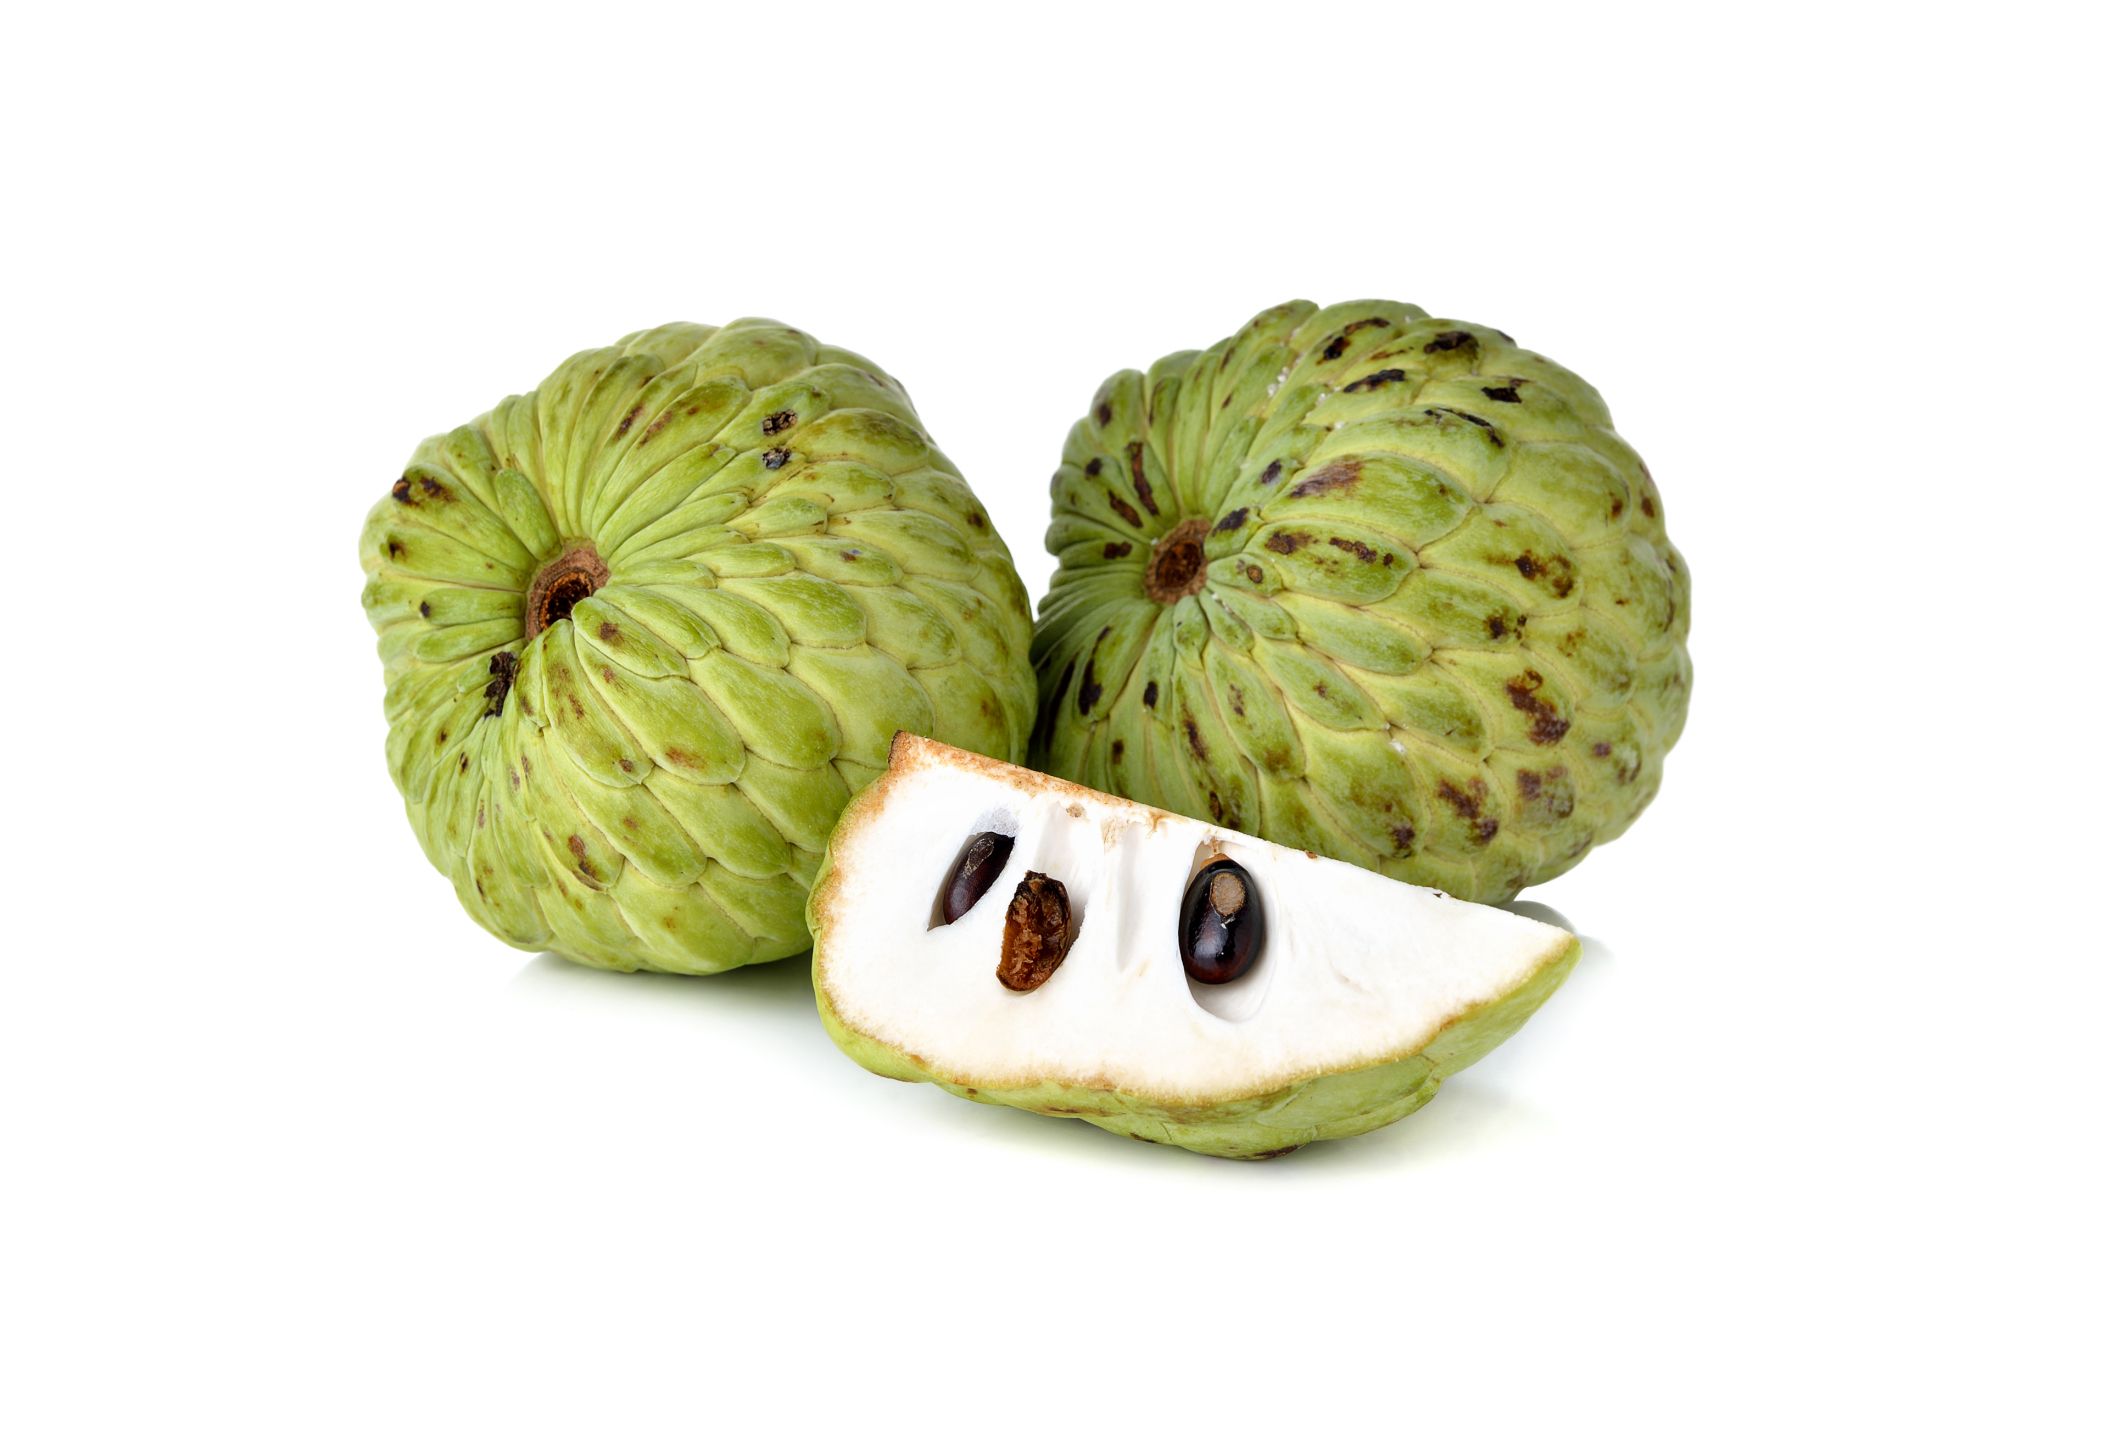 Sugar apple, some of the traditional fruit of Rosh Hashanah